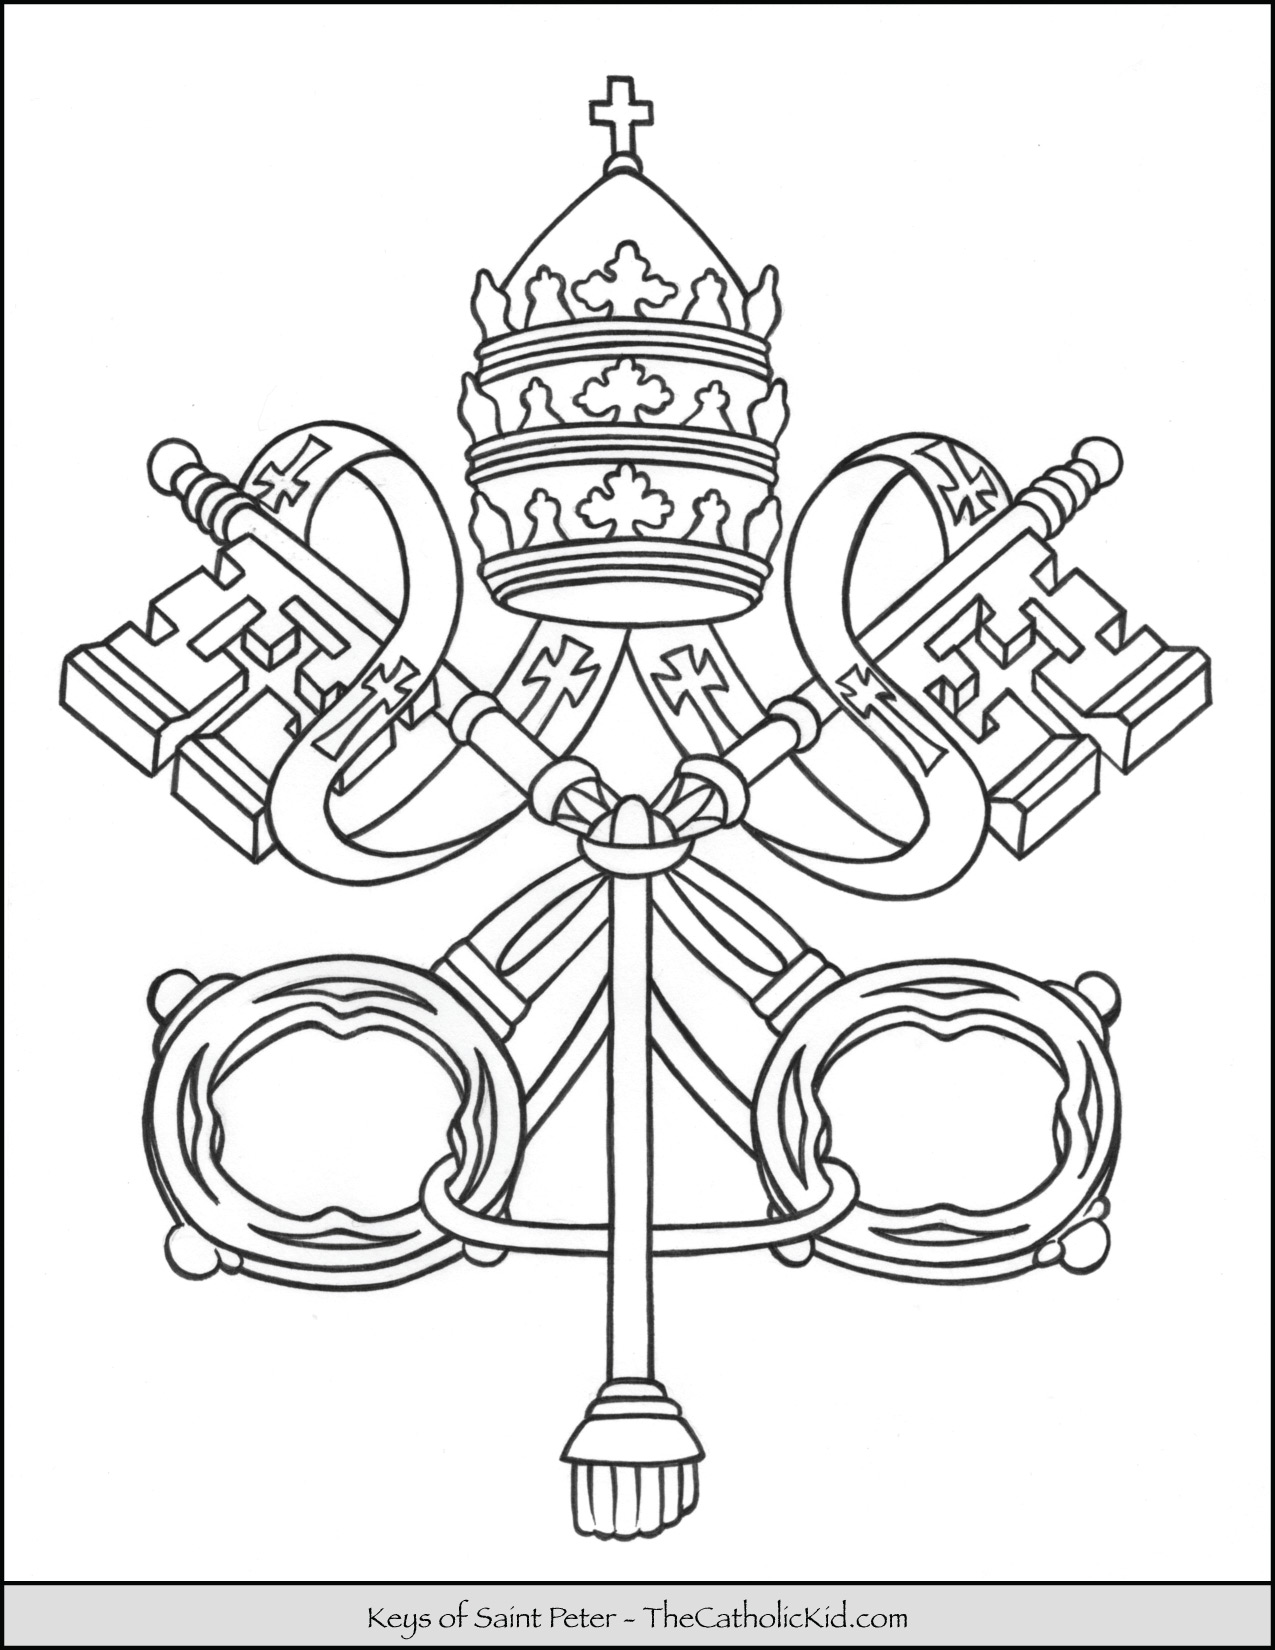 Keys of Saint Peter Coloring Page - TheCatholicKid.com